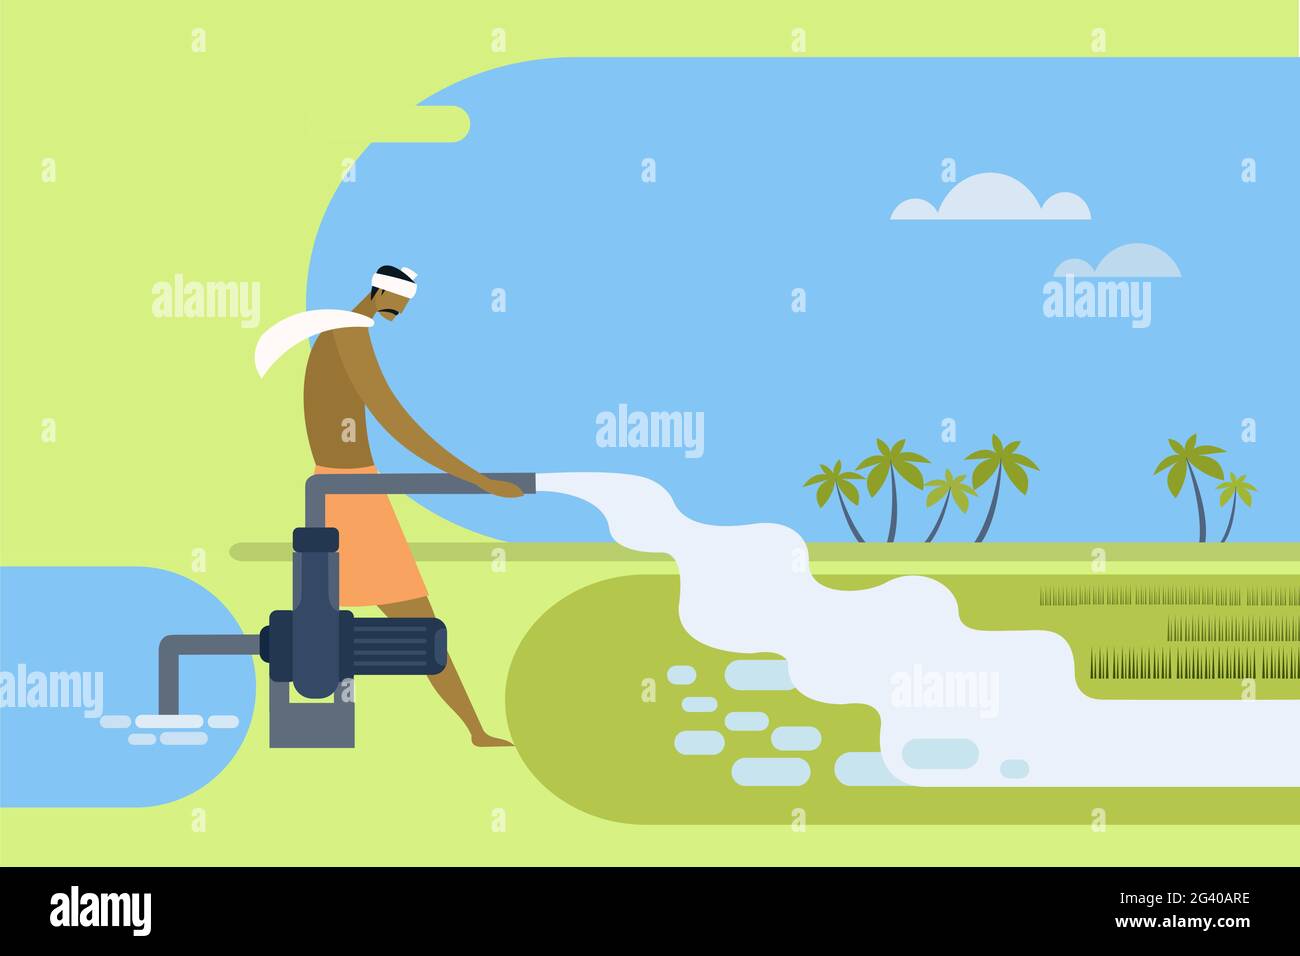 Indian farmer pumping water to agricultural field Stock Vector